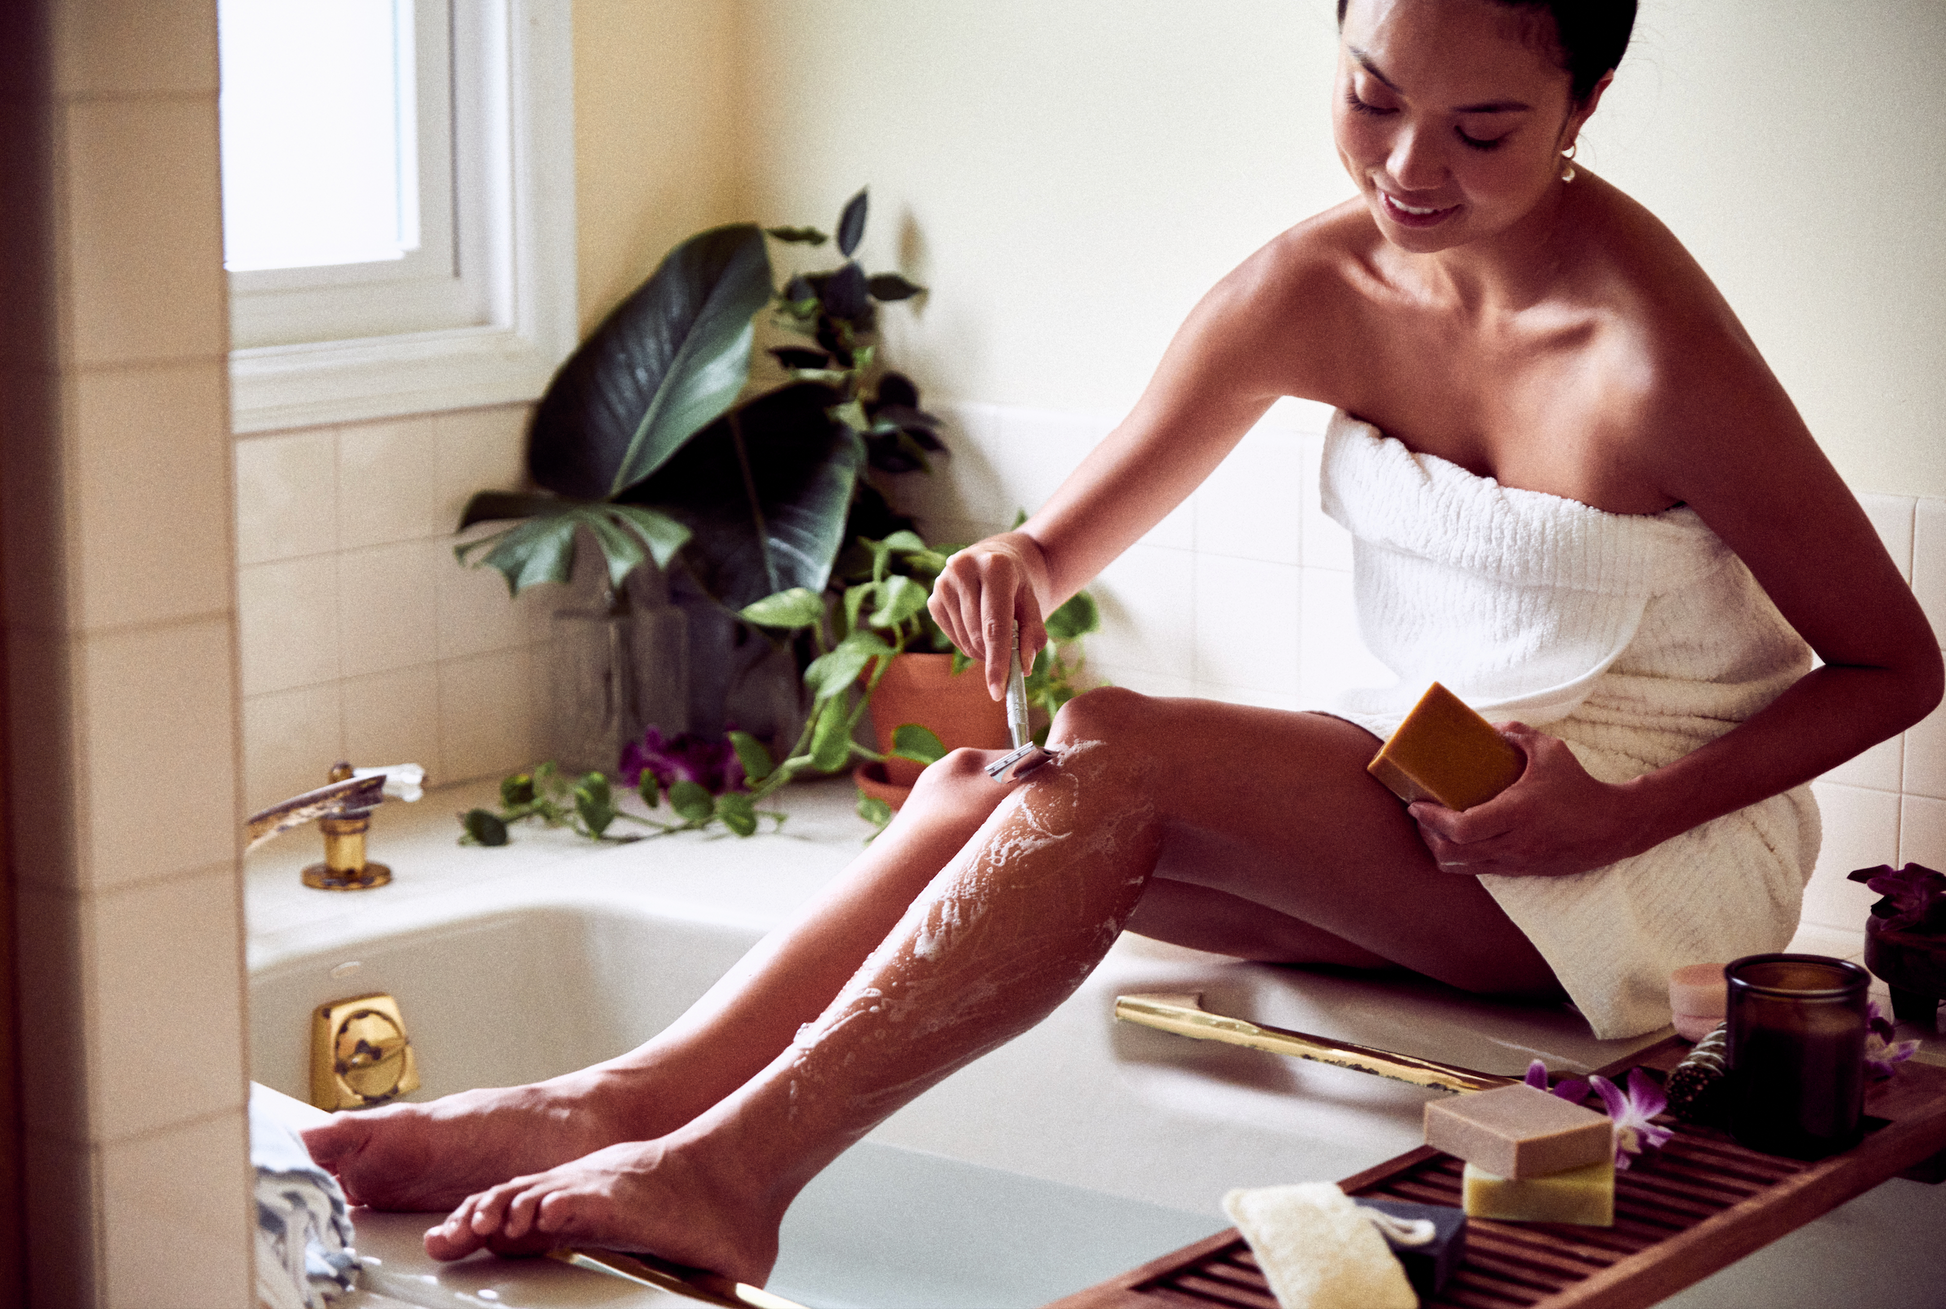 This image shows the Desesh premium quality solid body and face shave soap bar as an alternative to cans of shave foam or cream. This is a more eco friendly sustainable zero waste option and the shave bars come in biodegradable packaging. Shown here is a woman using a metal safety razor to shave her legs in the bath while using a solid shave soap bar